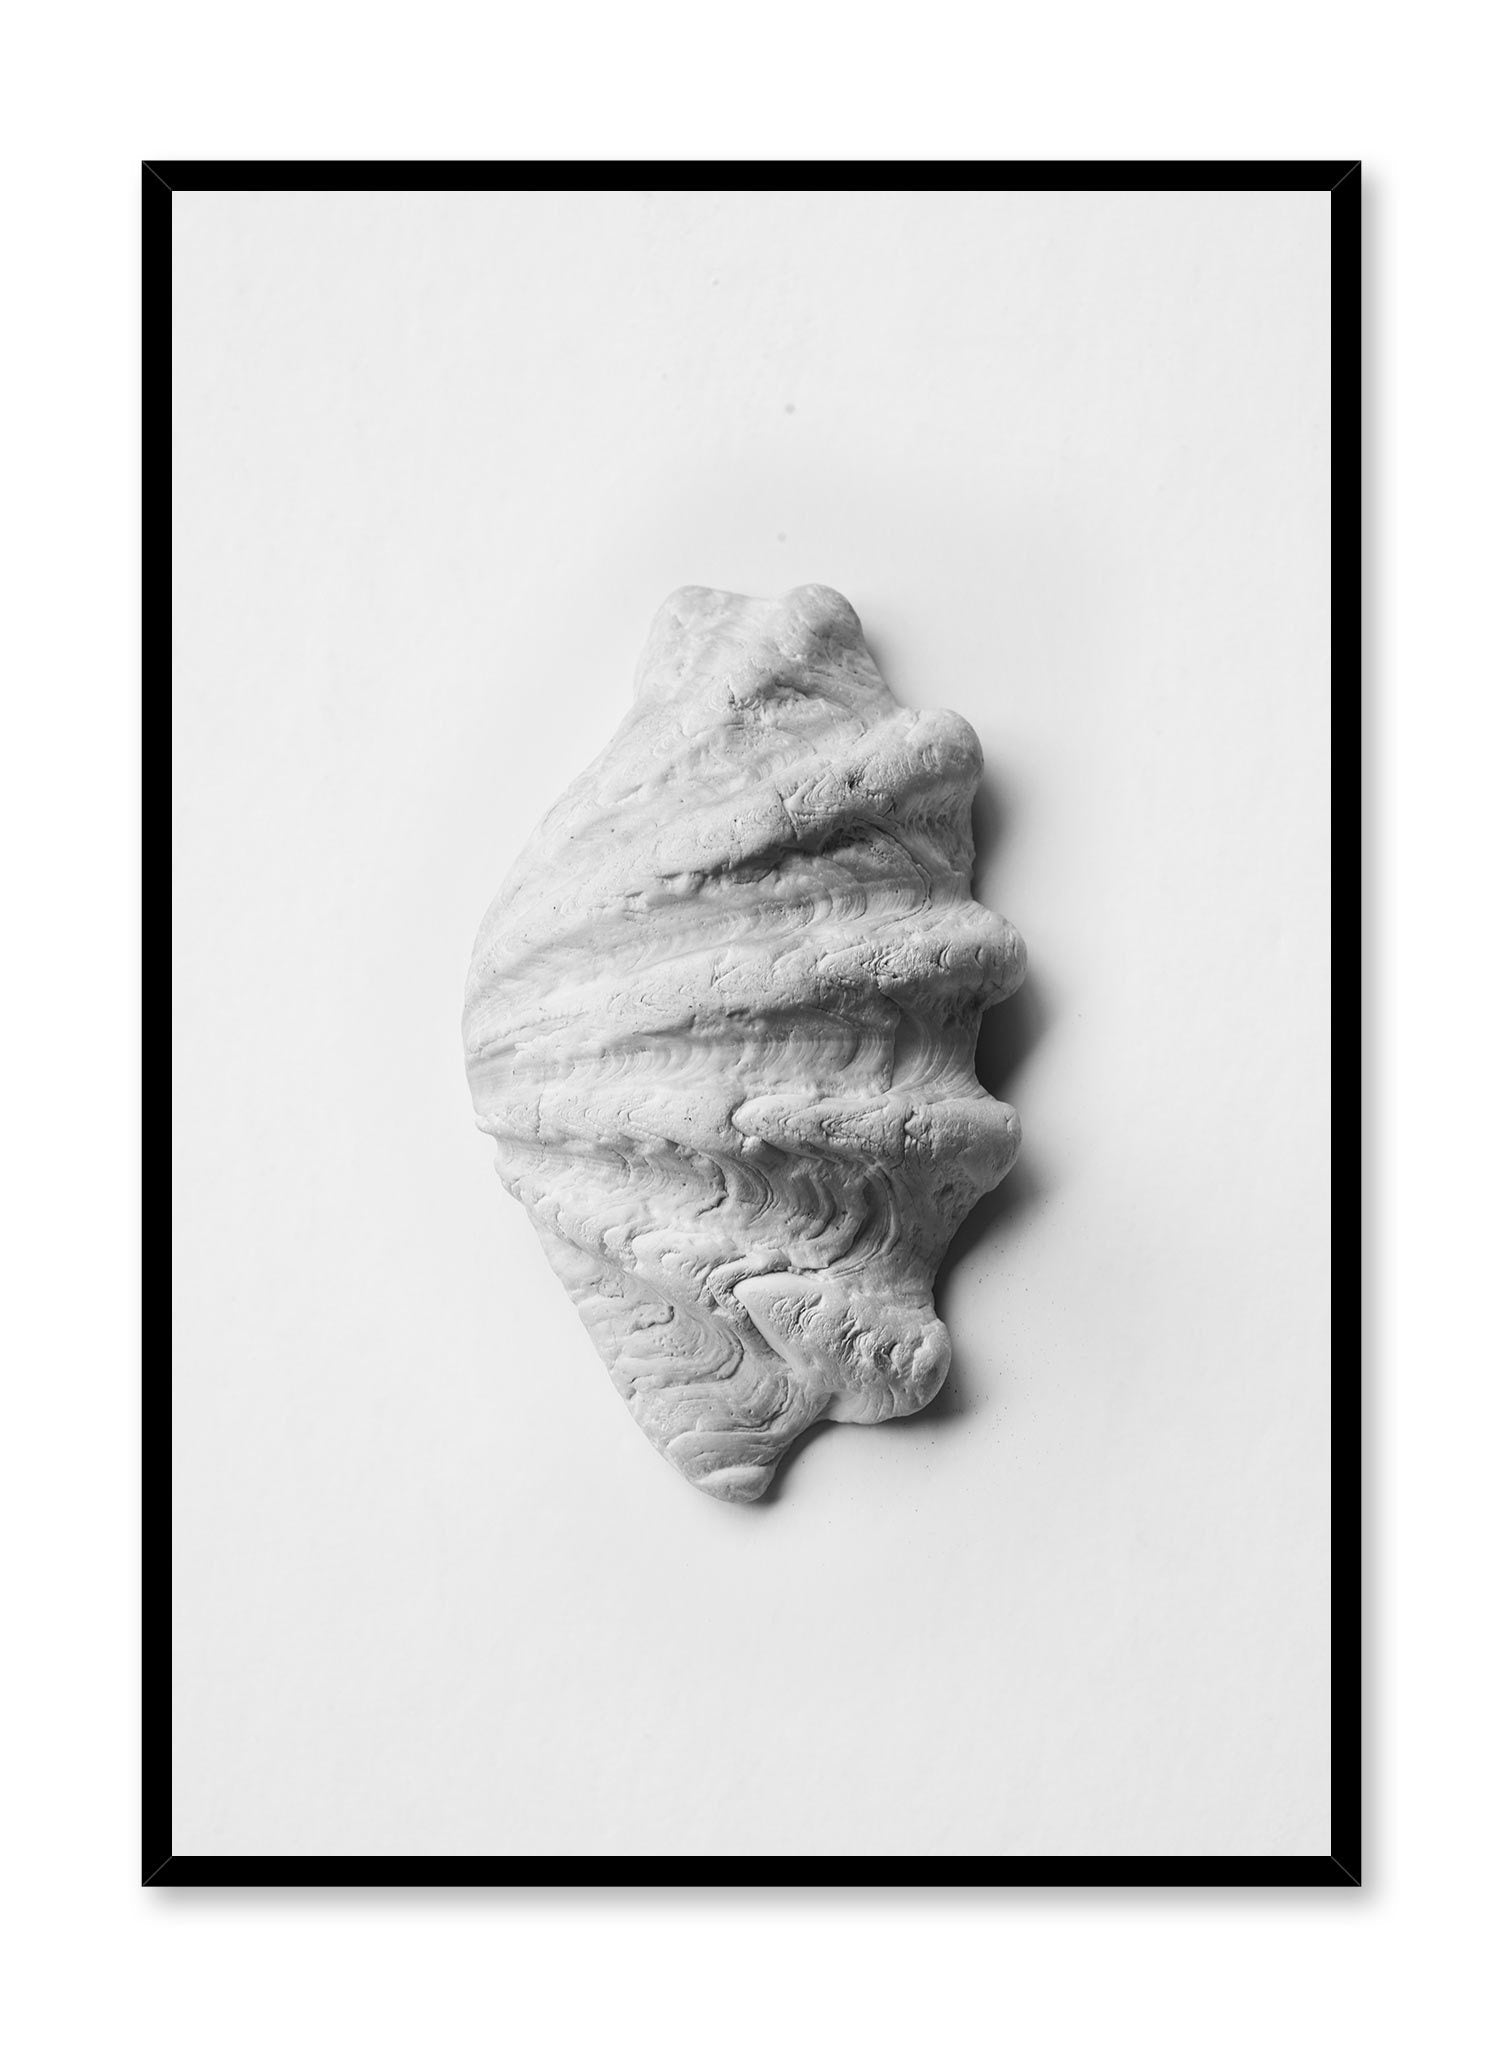 Scallop Shell is a minimalist photography of a close-up shot of a white scallop shell facing the right side by Opposite Wall.